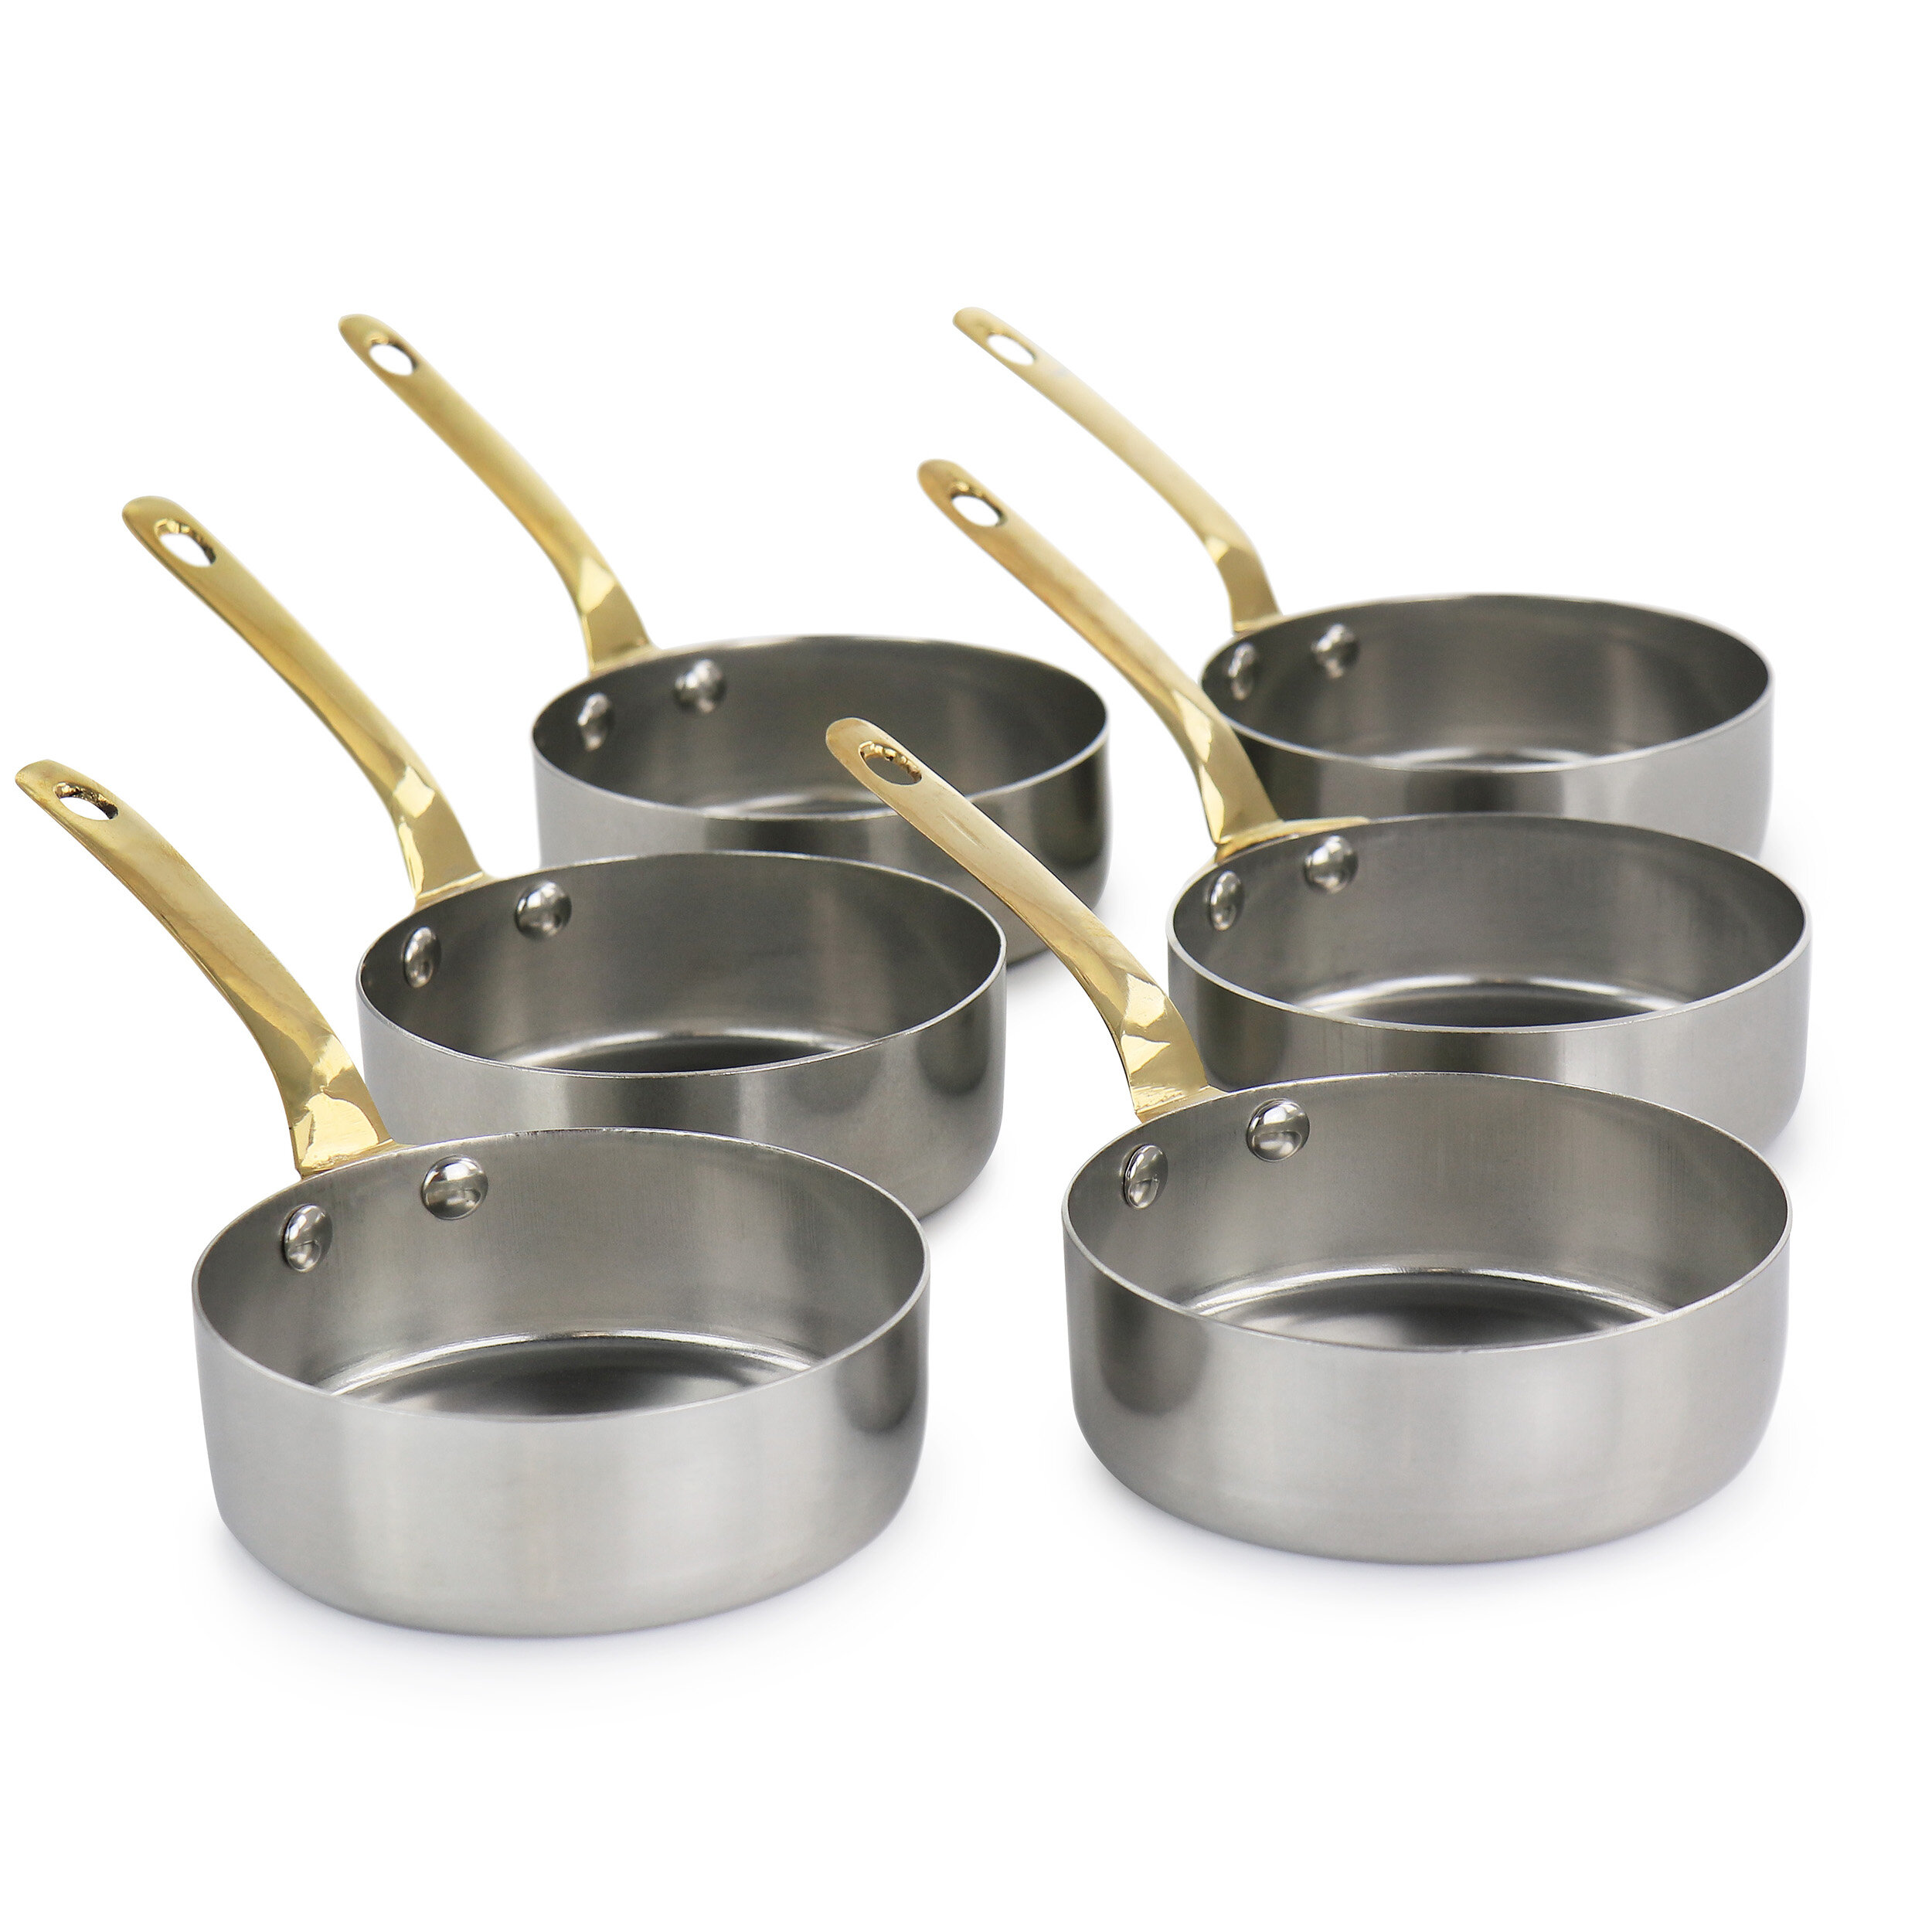 Stainless Steel Set (8-piece) - Sardel: Improved Accessibility